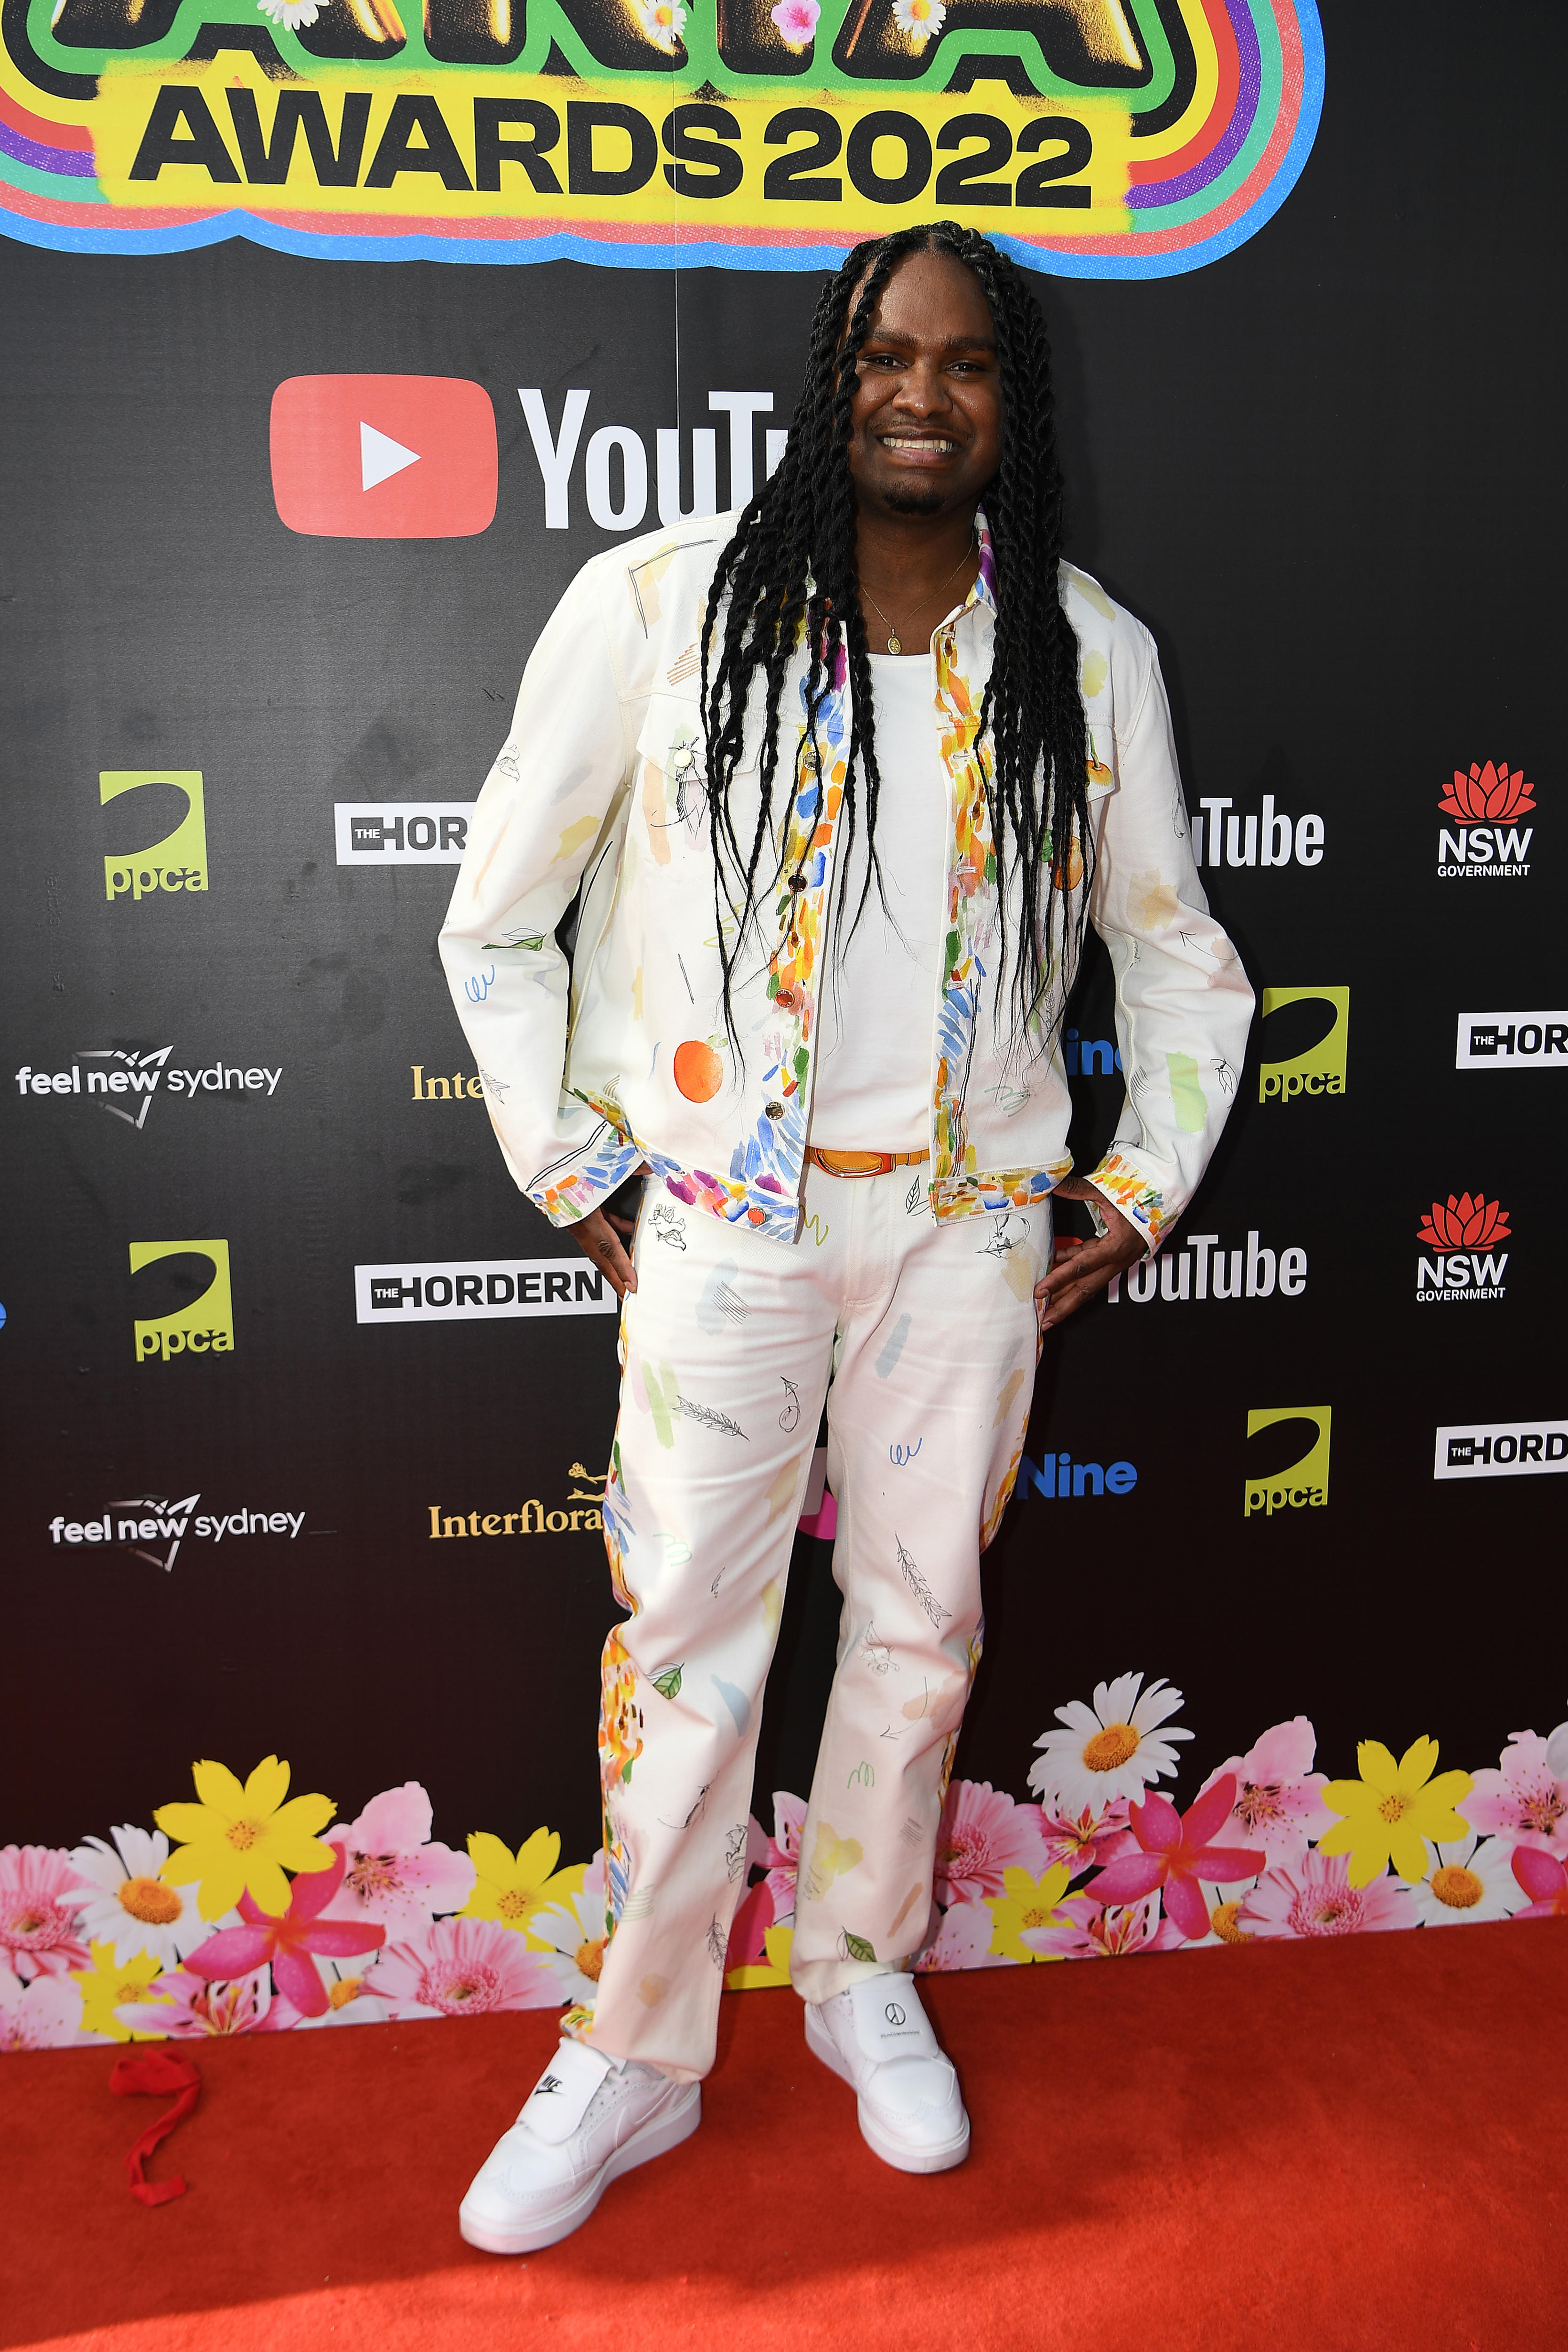 Baker Boy wears a white suit with colorful details on the sides.